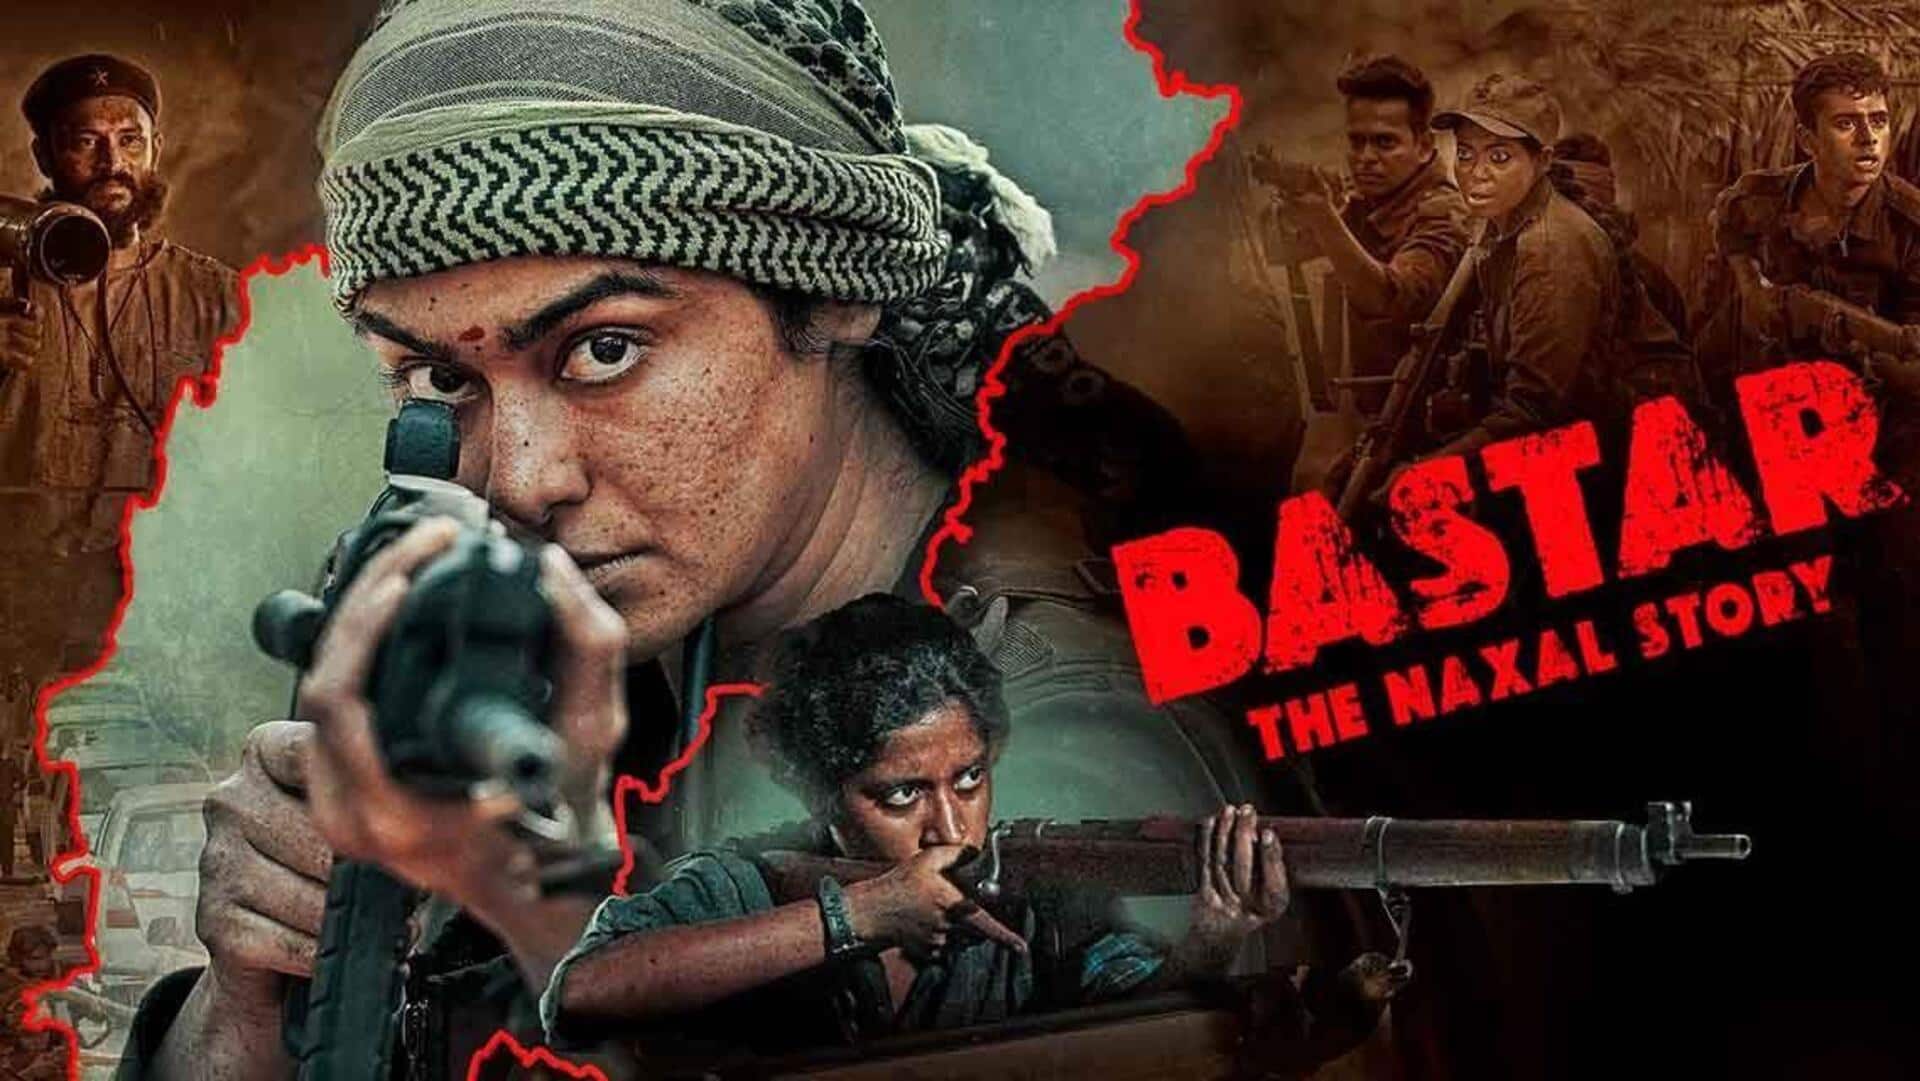 Box office collection: 'Bastar: The Naxal Story' crashes further